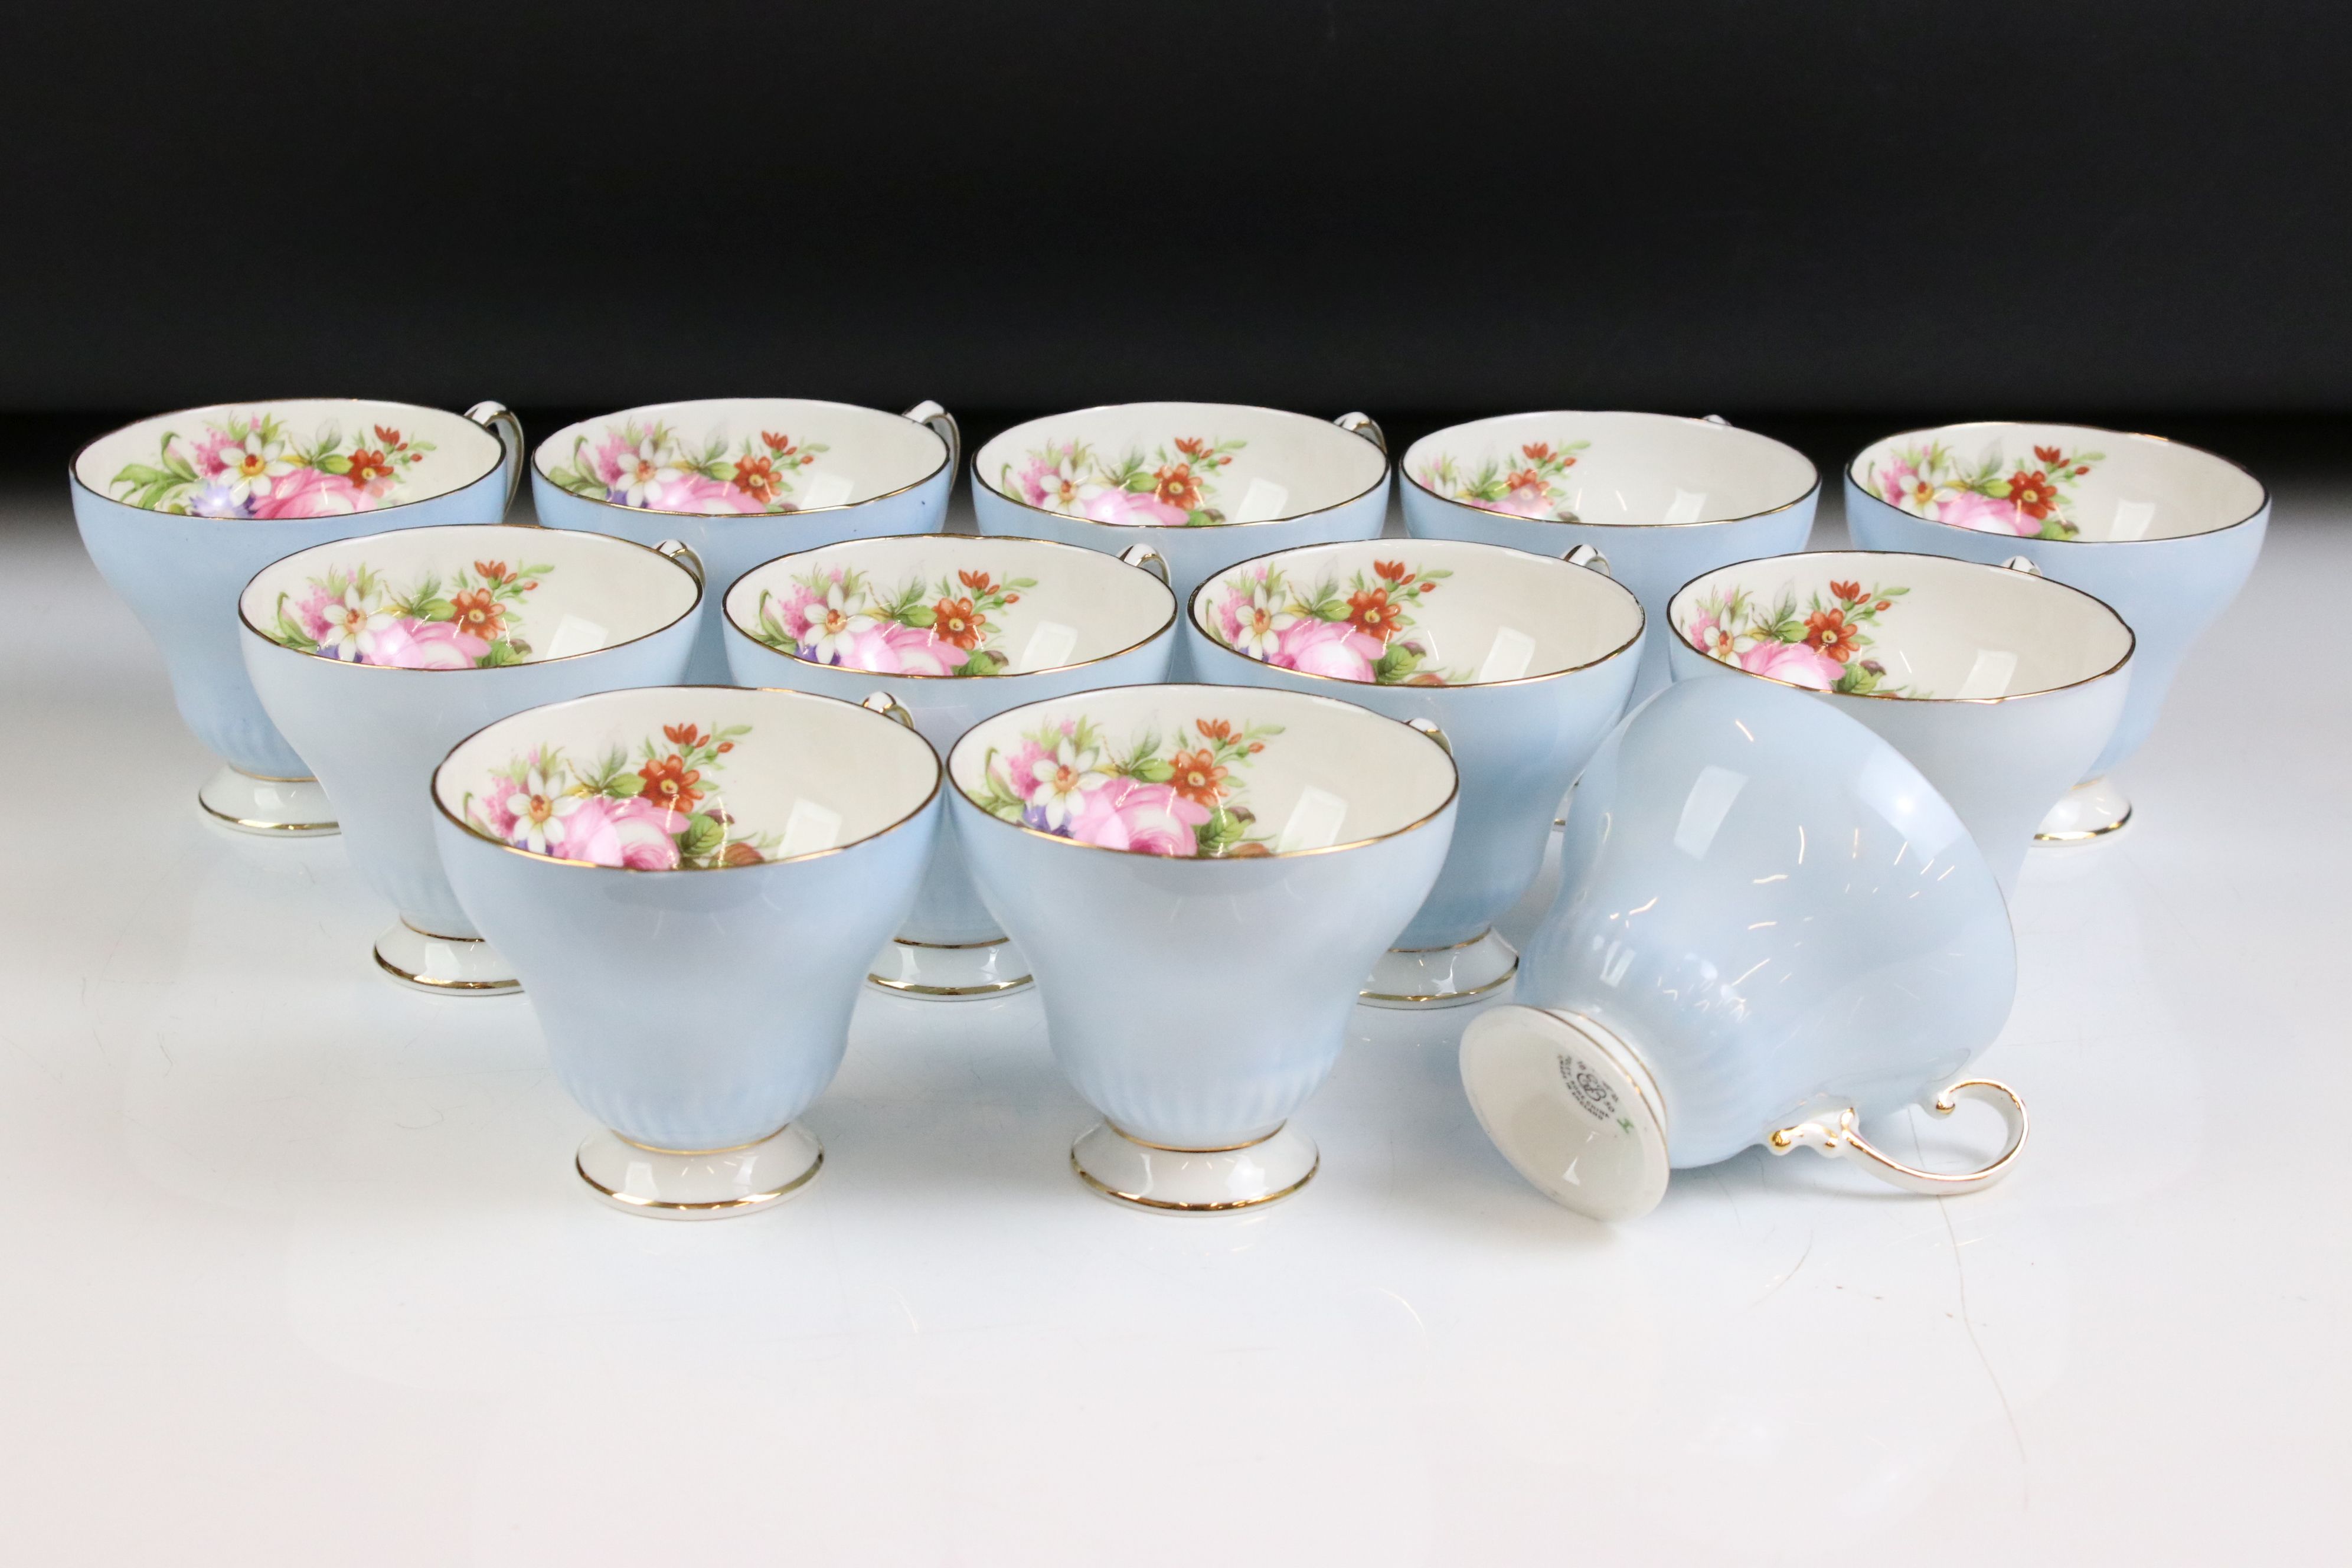 Foley floral tea set in pale blue (pattern 3125) comprising of a teapot & cover, 12 teacups, 11 - Image 11 of 13